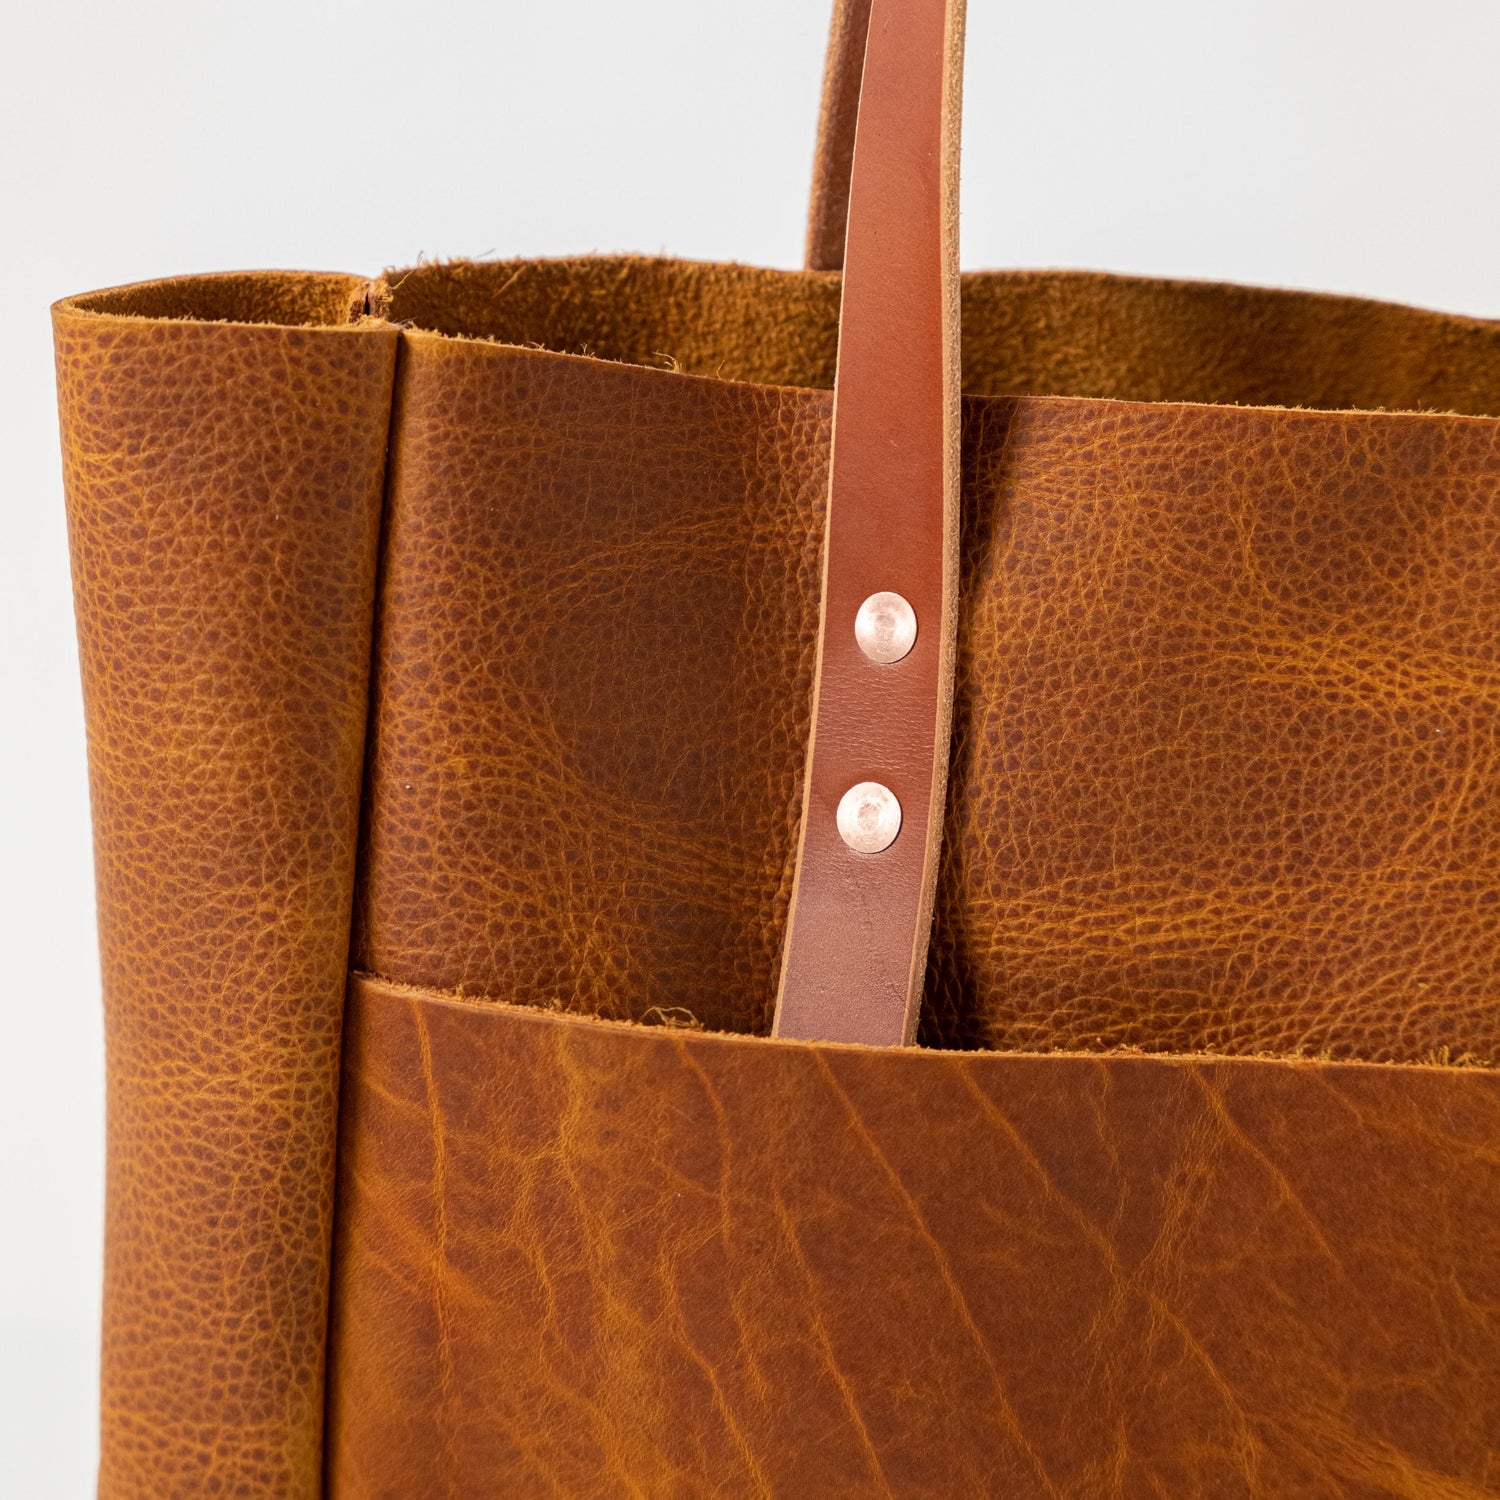 Honey Bison Carryall Tote